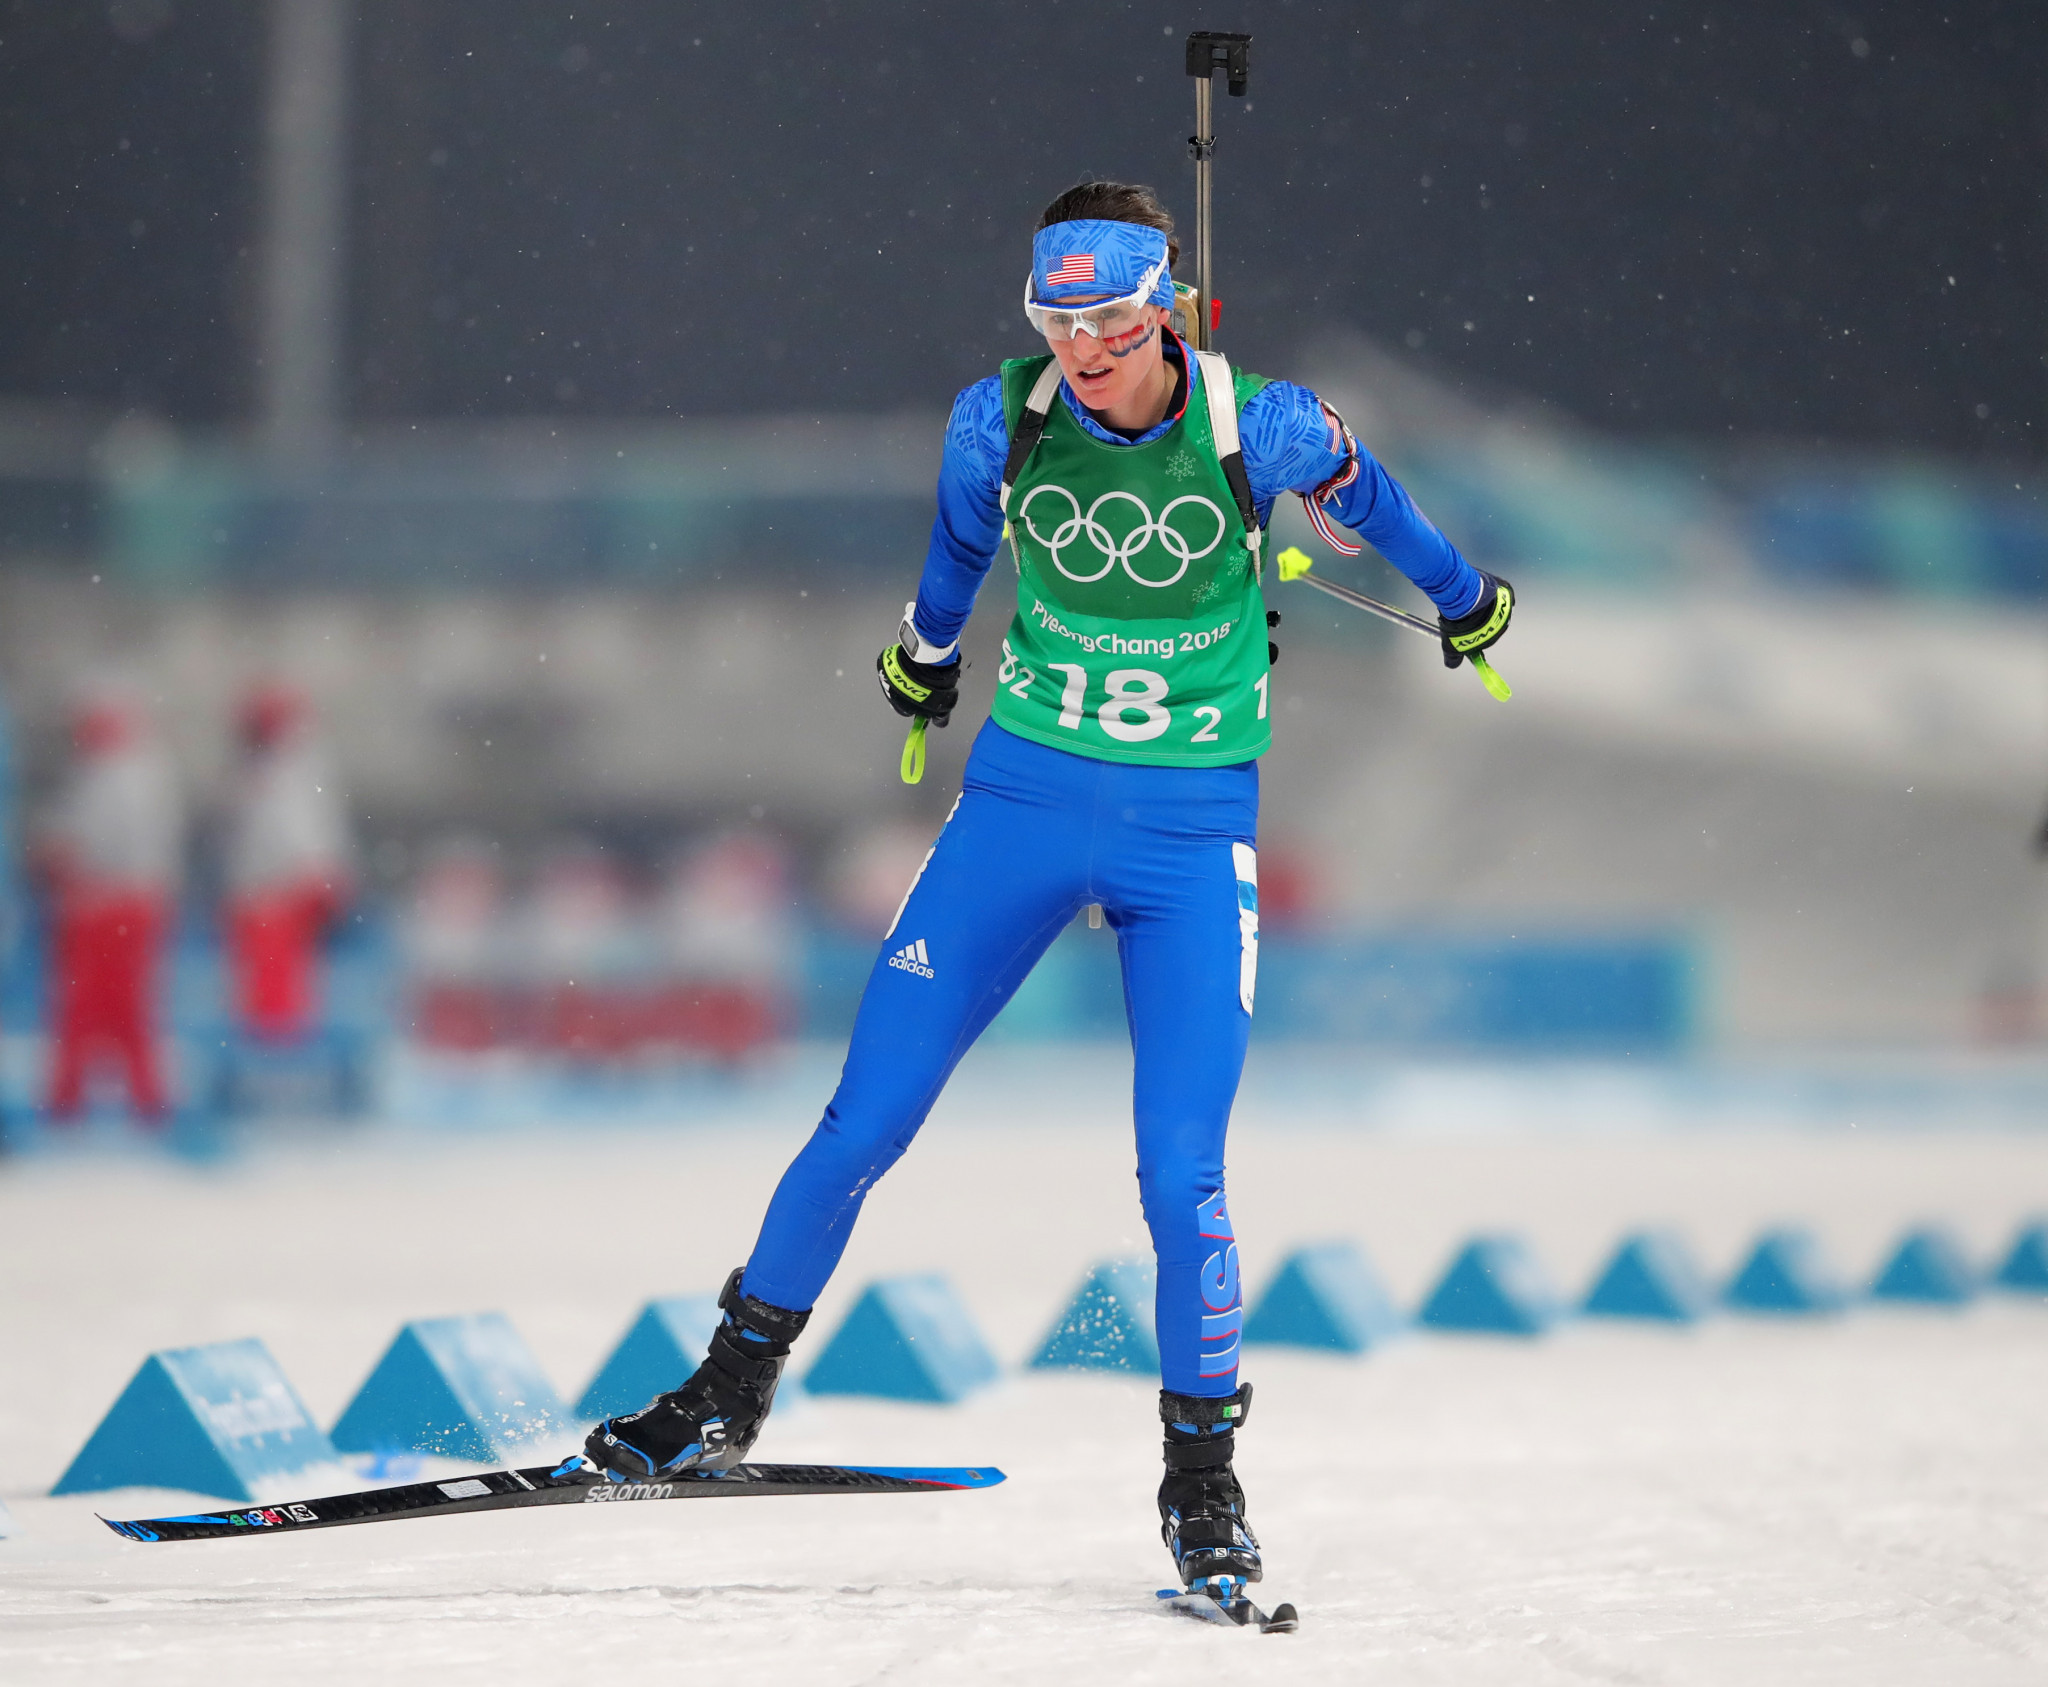 IBU Athlete Committee chair Clare Egan claimed the corruption scandal could be the change biathlon needs ©Getty Images